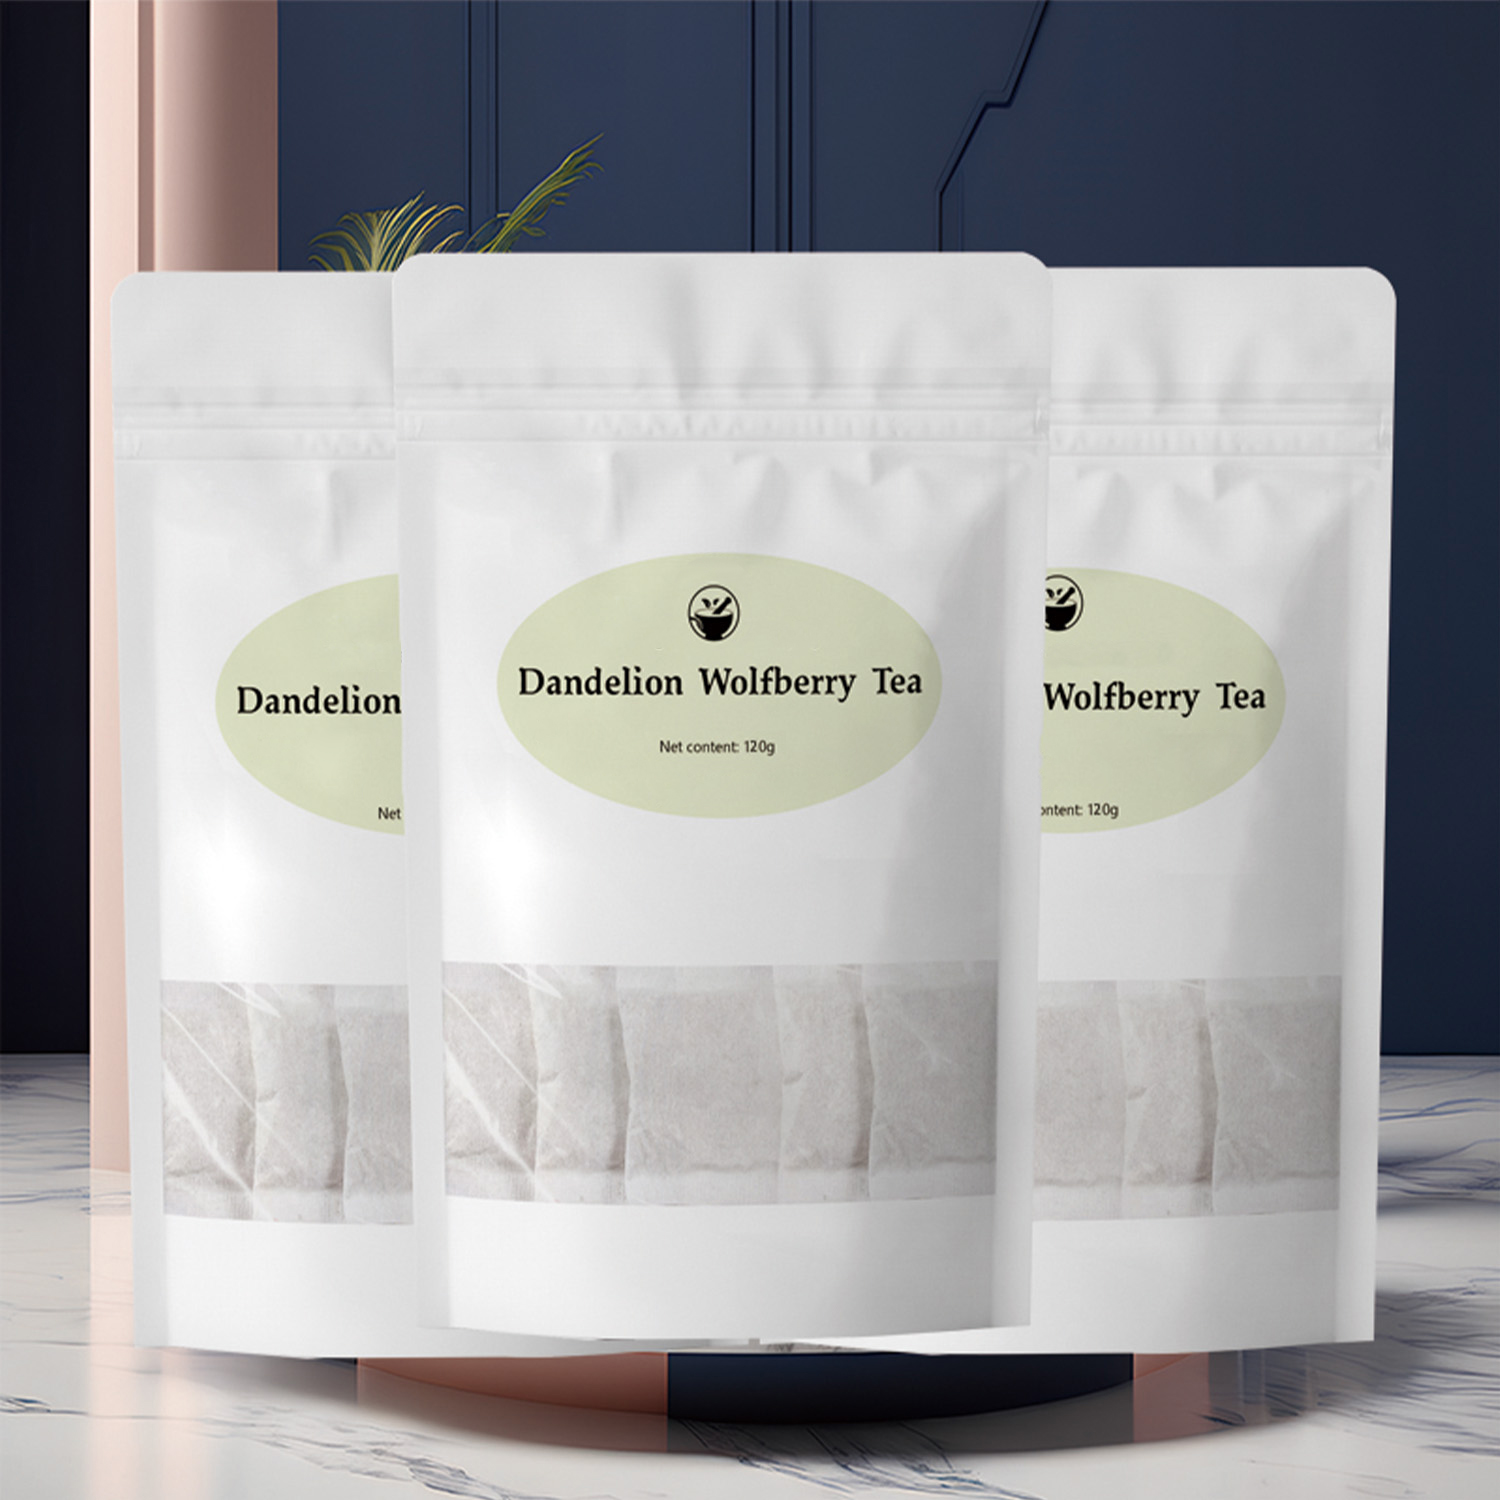 Dandelion Wolfberry Tea, Natural Tea with Dandelion,Wolfberry, Cassia Seed and Chrysanthemum 30 Teabags per Pack